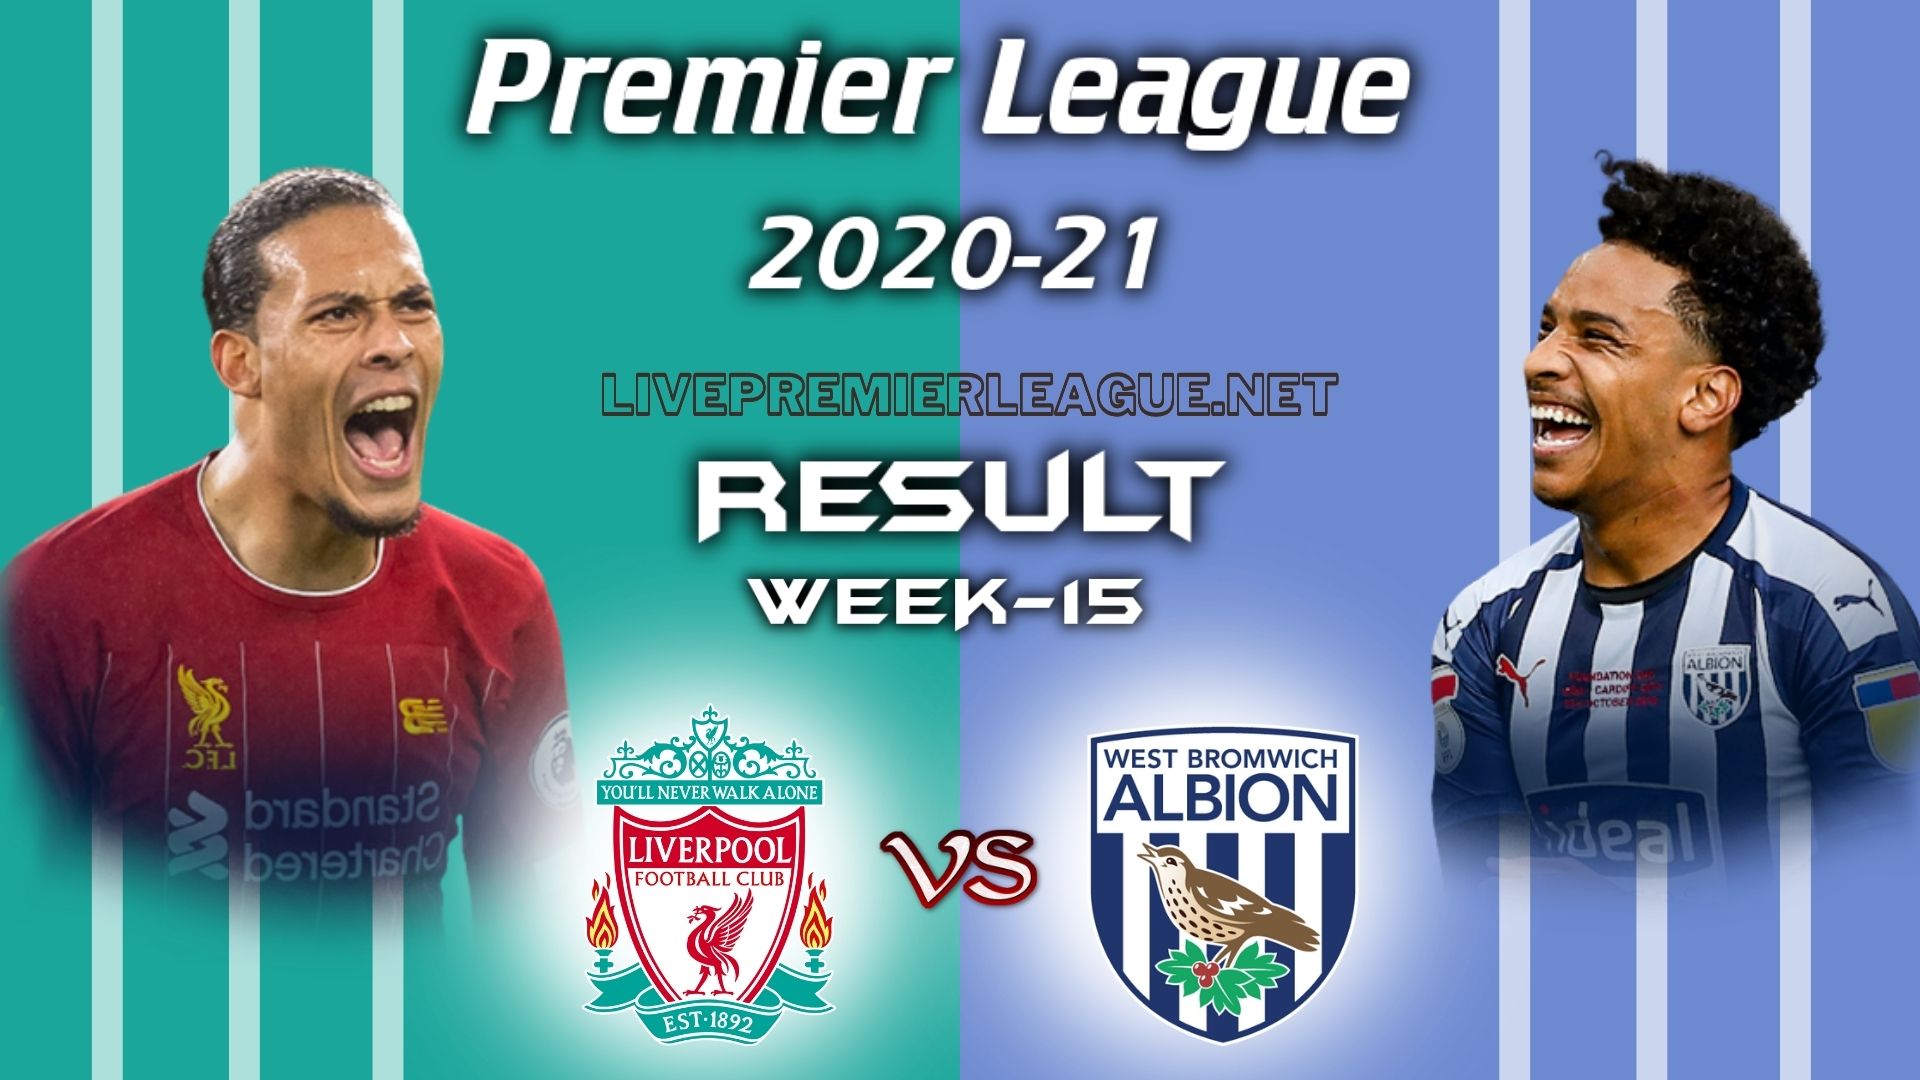 Liverpool Vs West Bromwich Albion | EPL Week 15 Result 2020